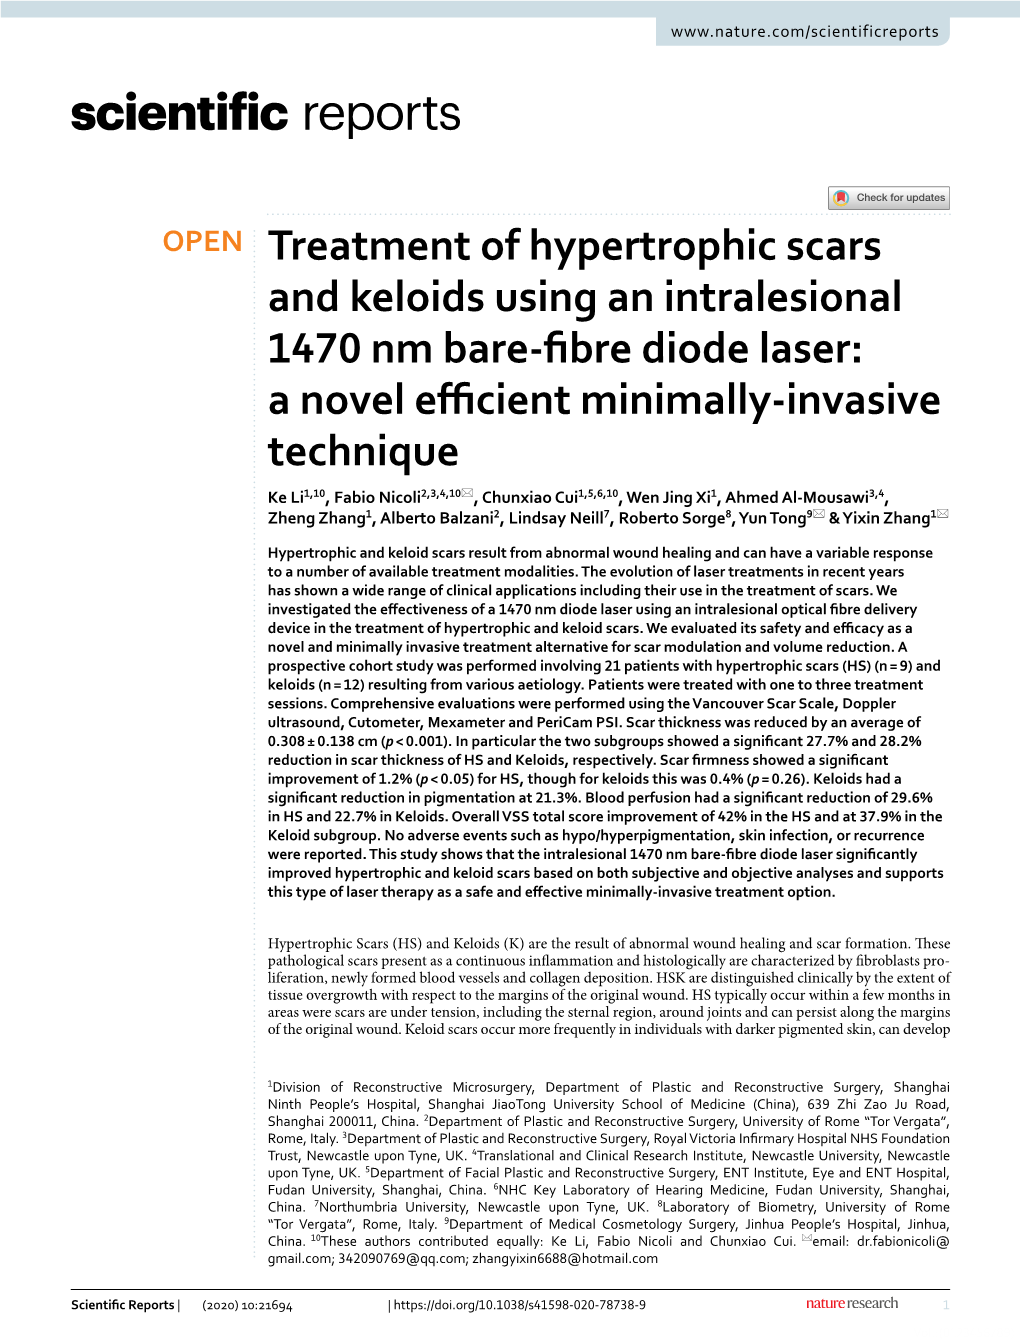 Treatment of Hypertrophic Scars and Keloids Using An